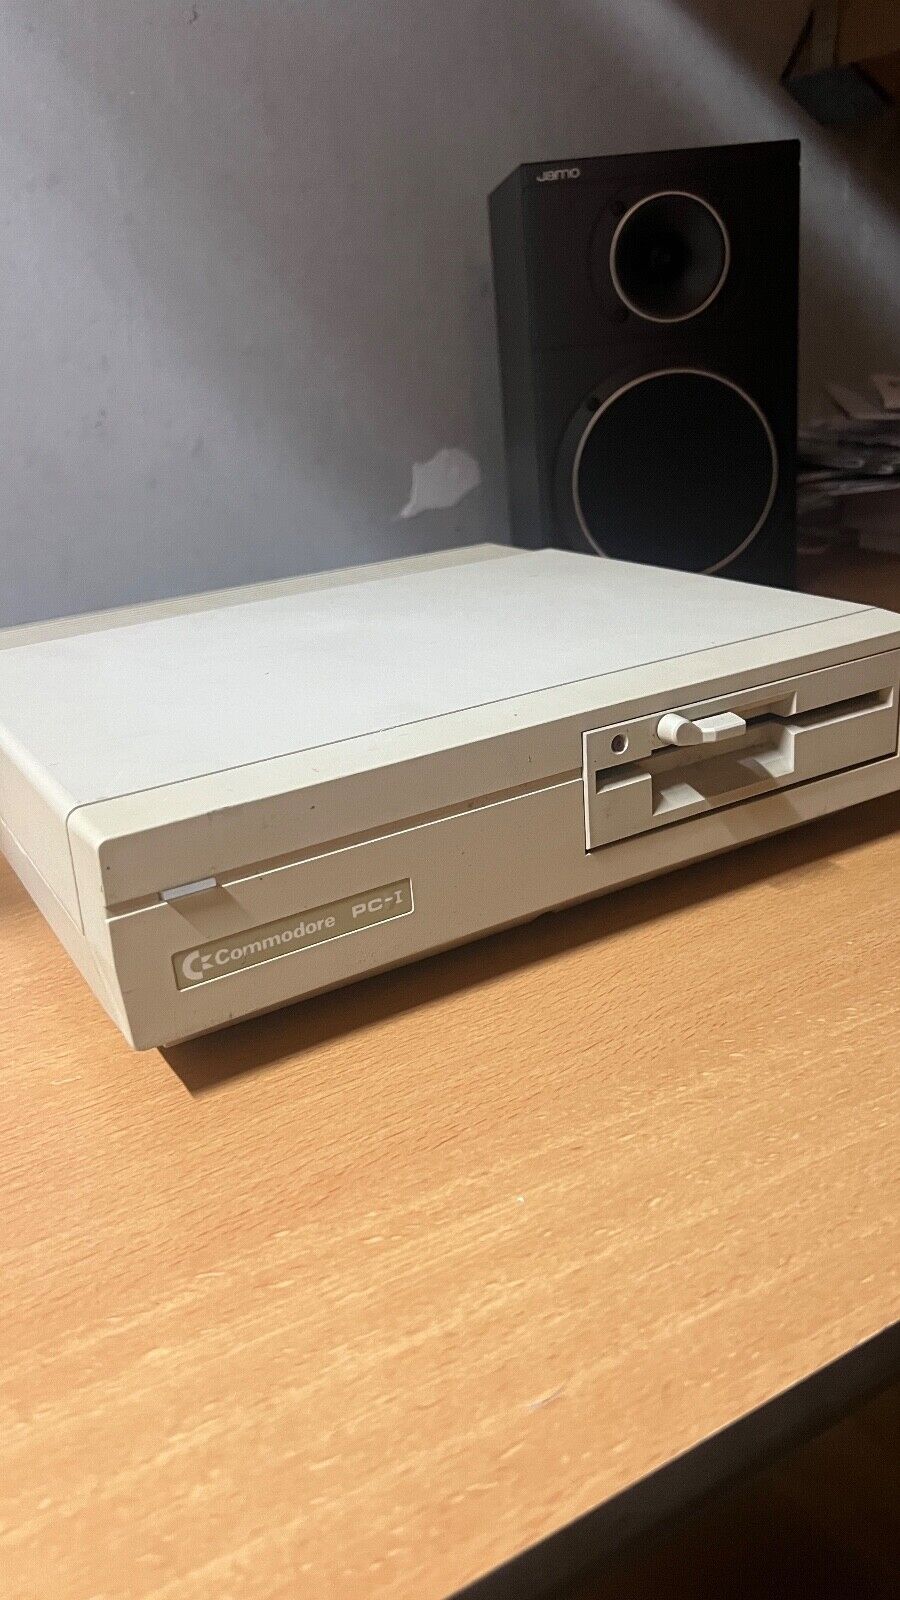 Vintage COMMODORE PC1 (WORKING)